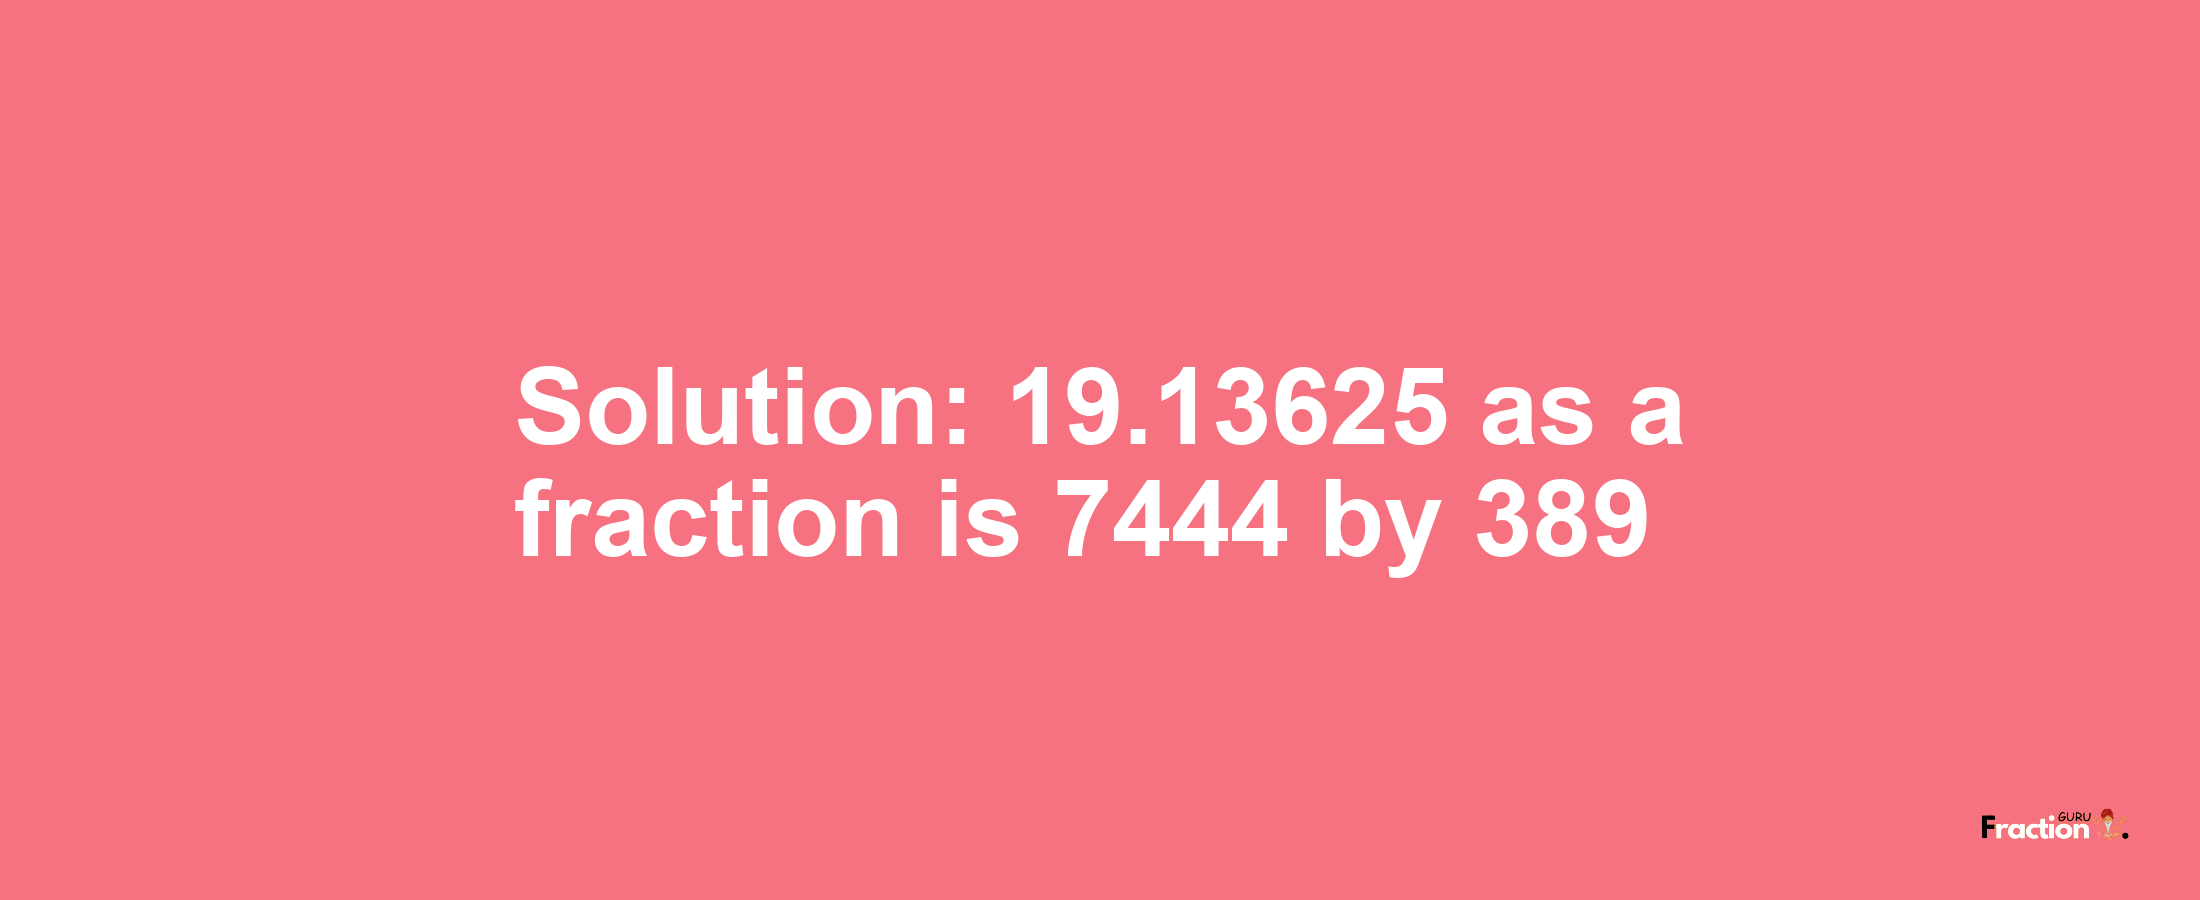 Solution:19.13625 as a fraction is 7444/389